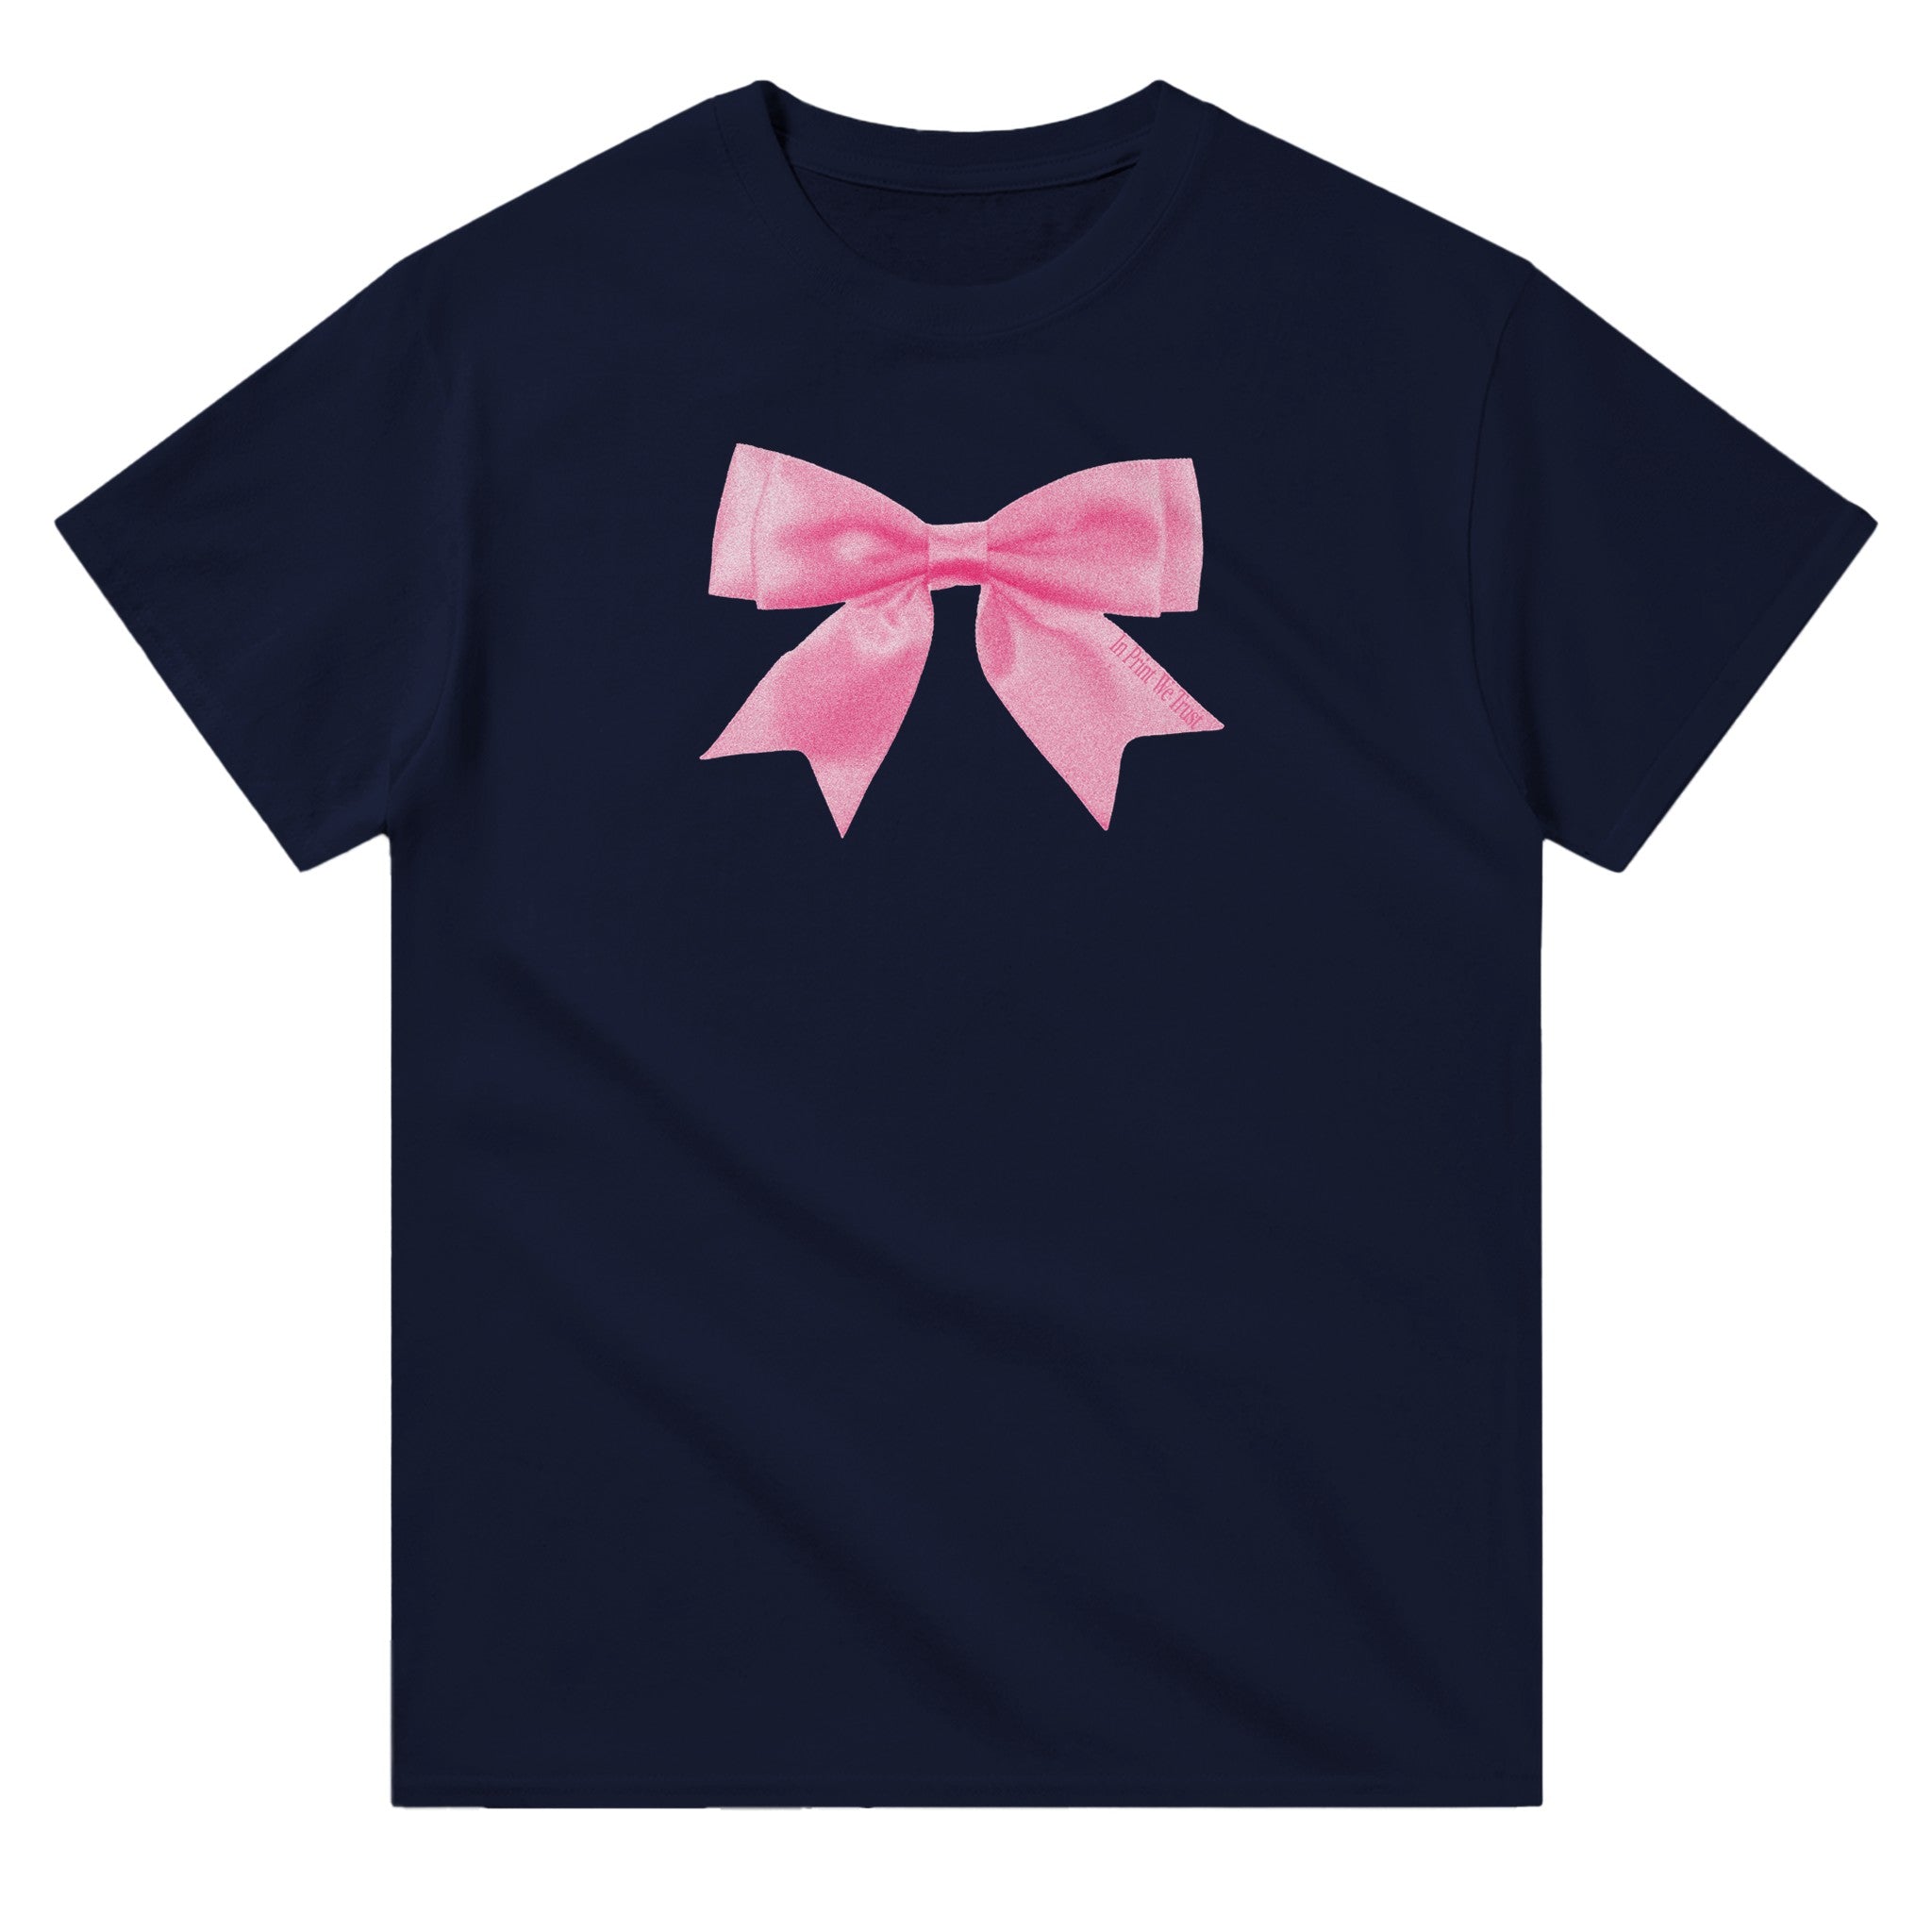 'Put a Bow On It' classic tee - In Print We Trust